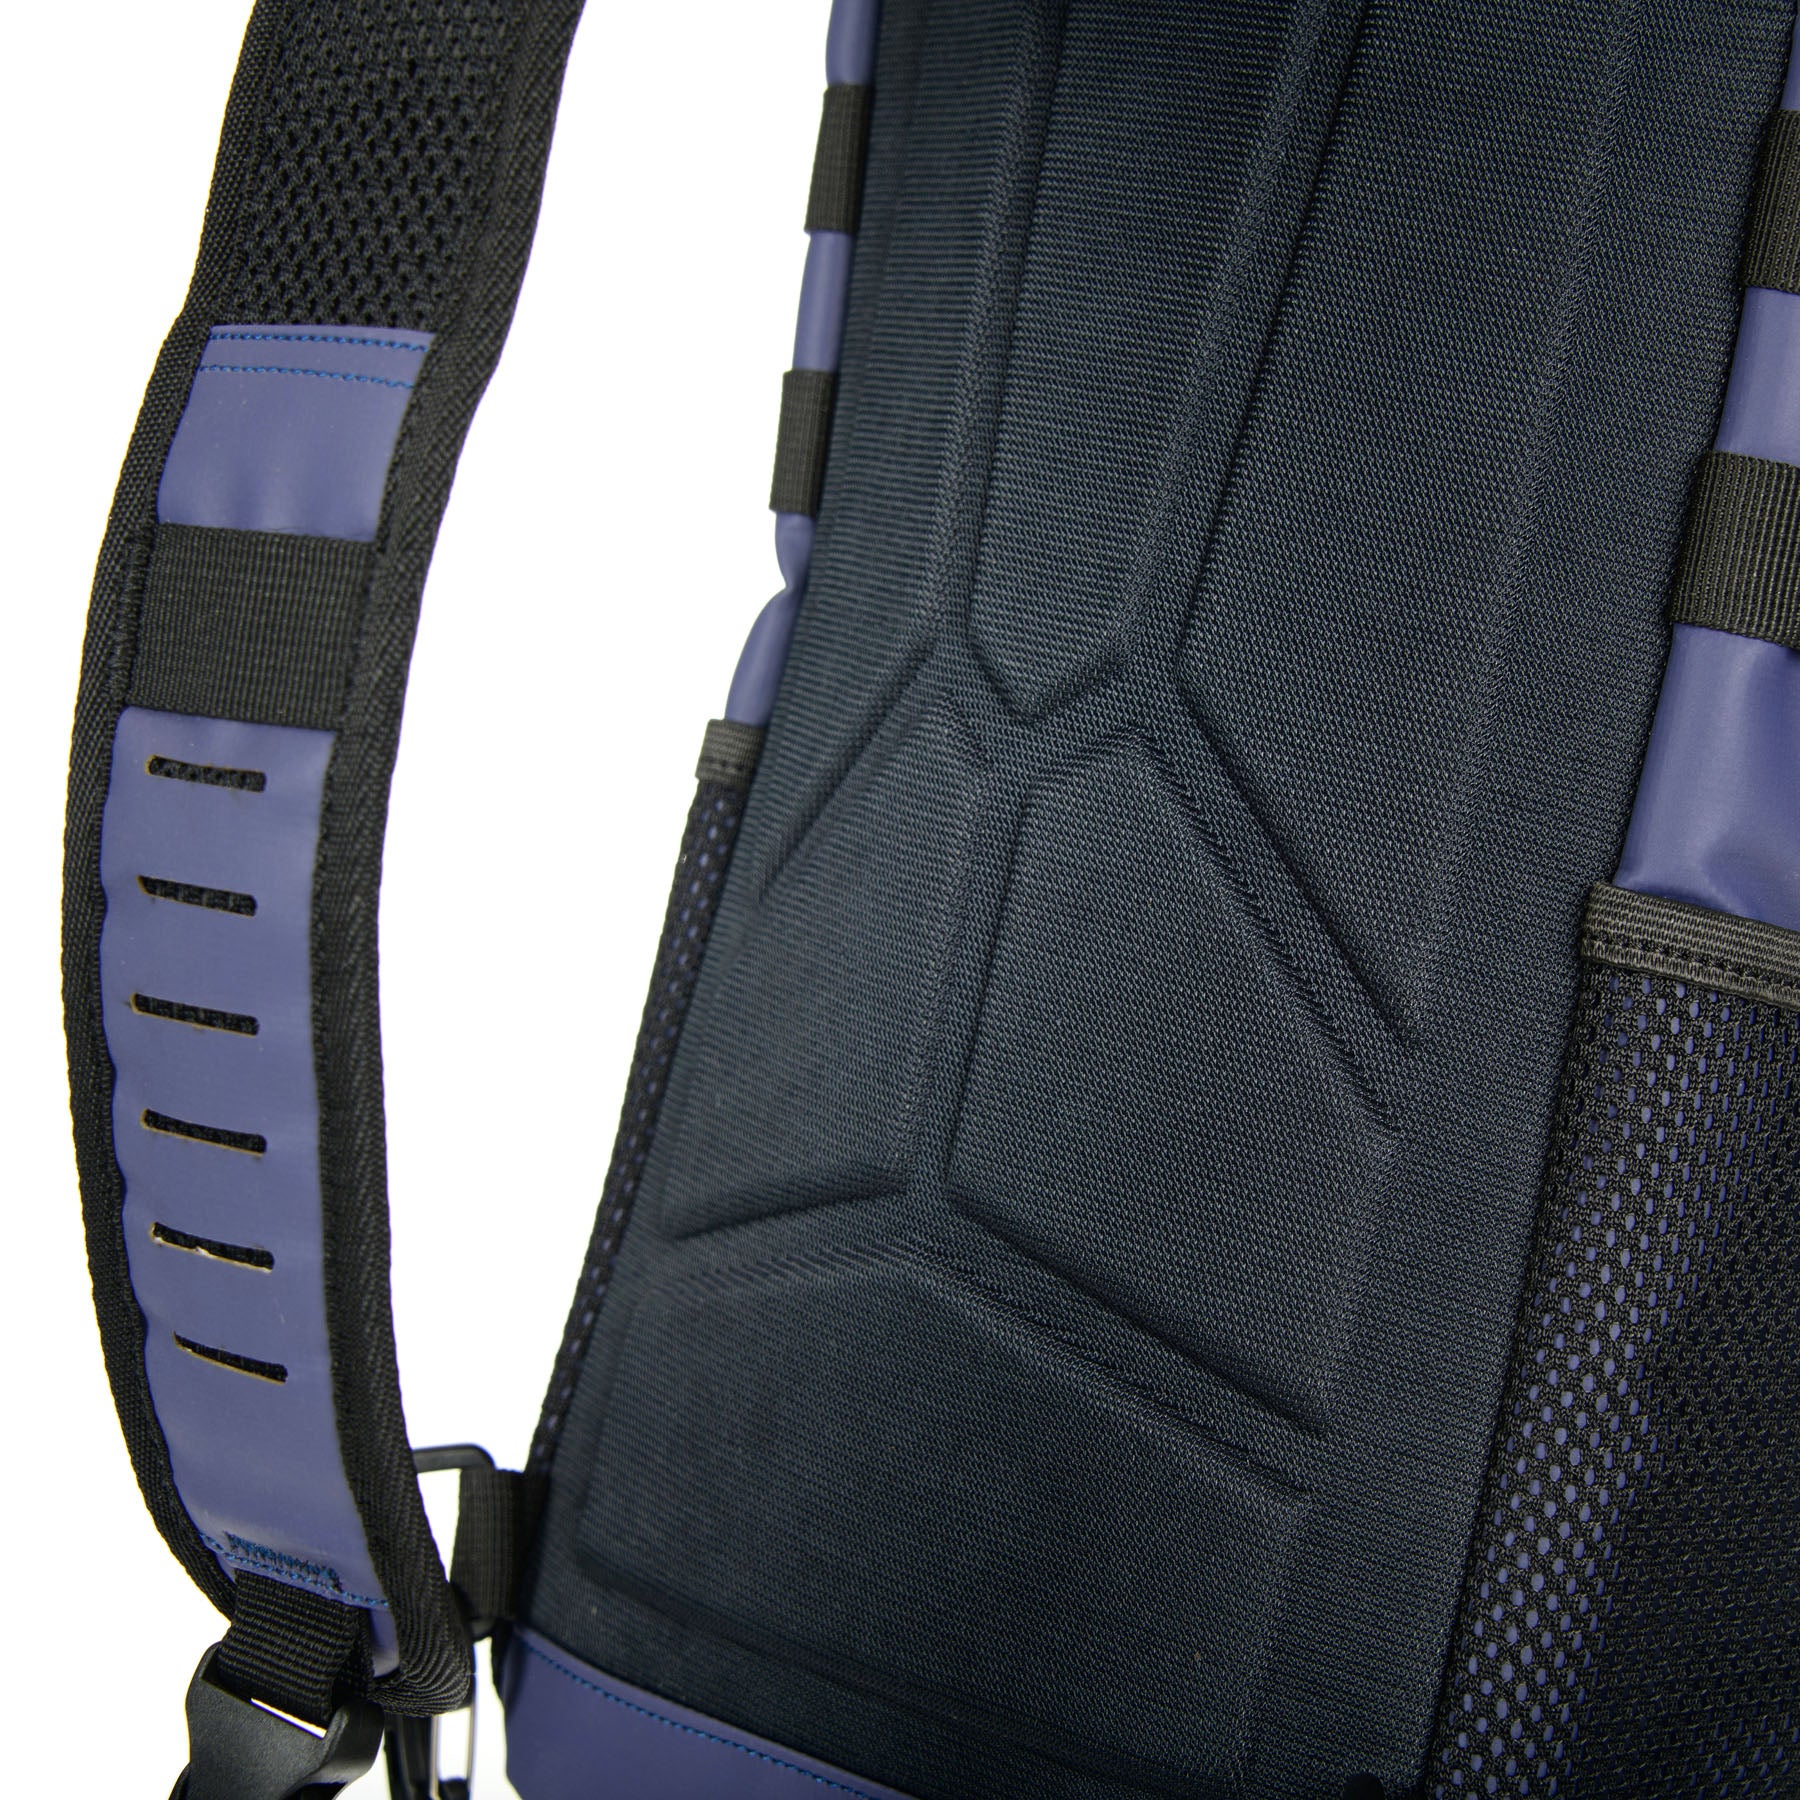 Tuff-Tool-Bags-The-Sling-Hydration-Tool-Bag-lockable-back-pack-straps